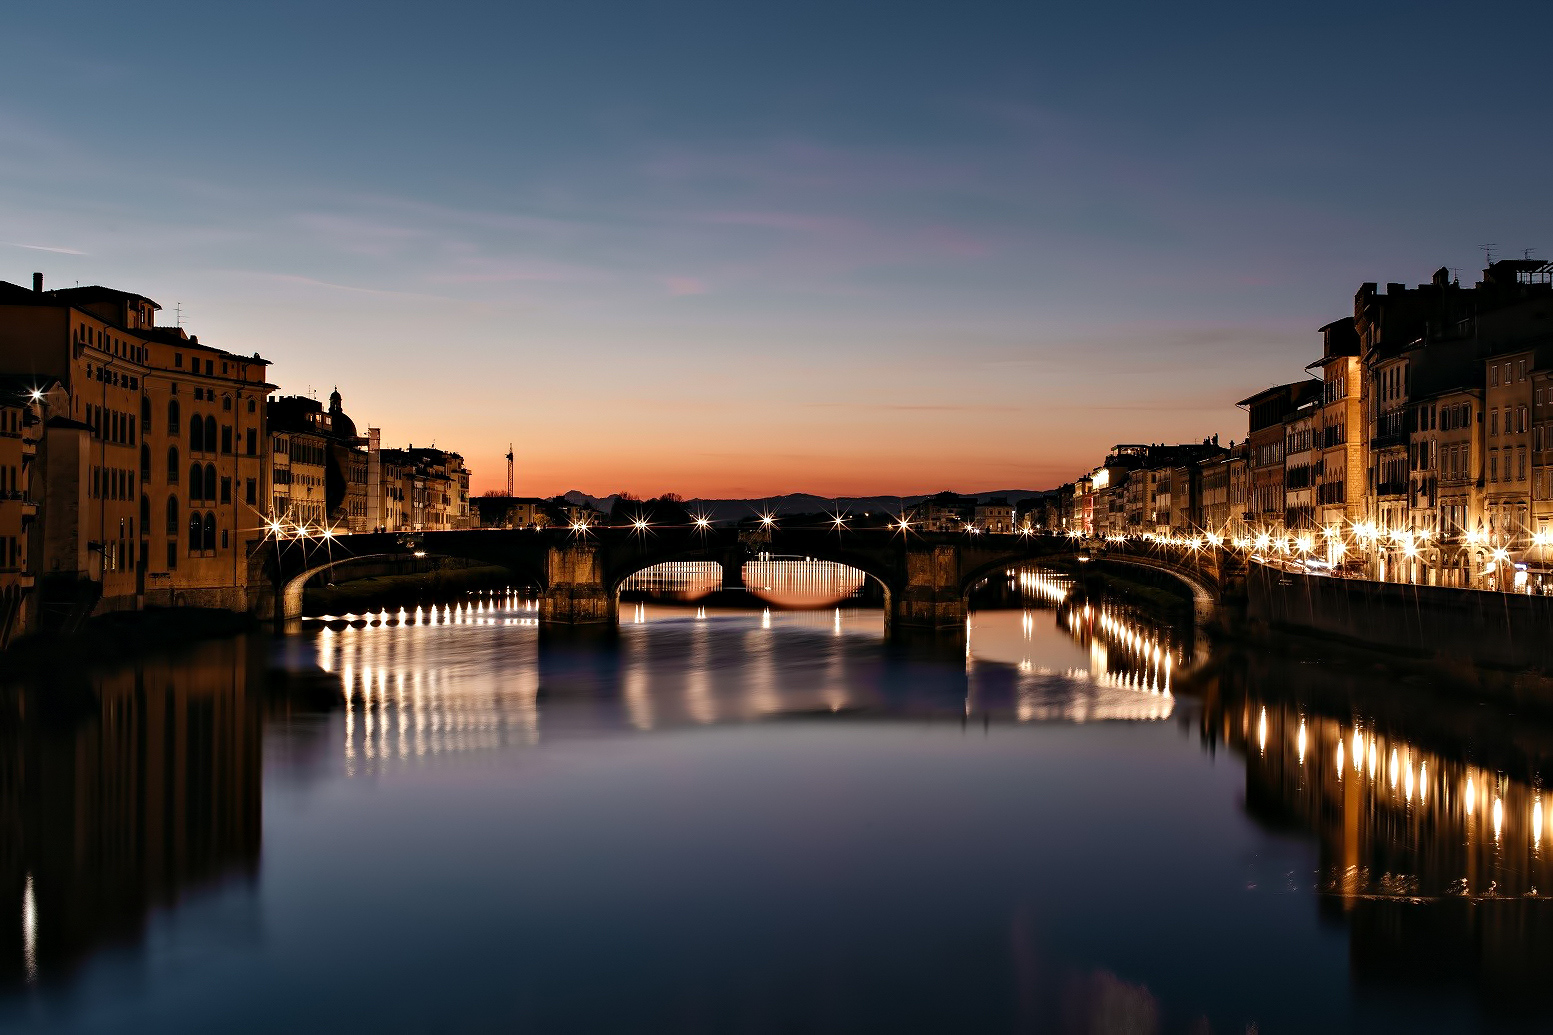 The St. Regis Florence Hotel – Florence, Italy – Arno River Bridge View at Night